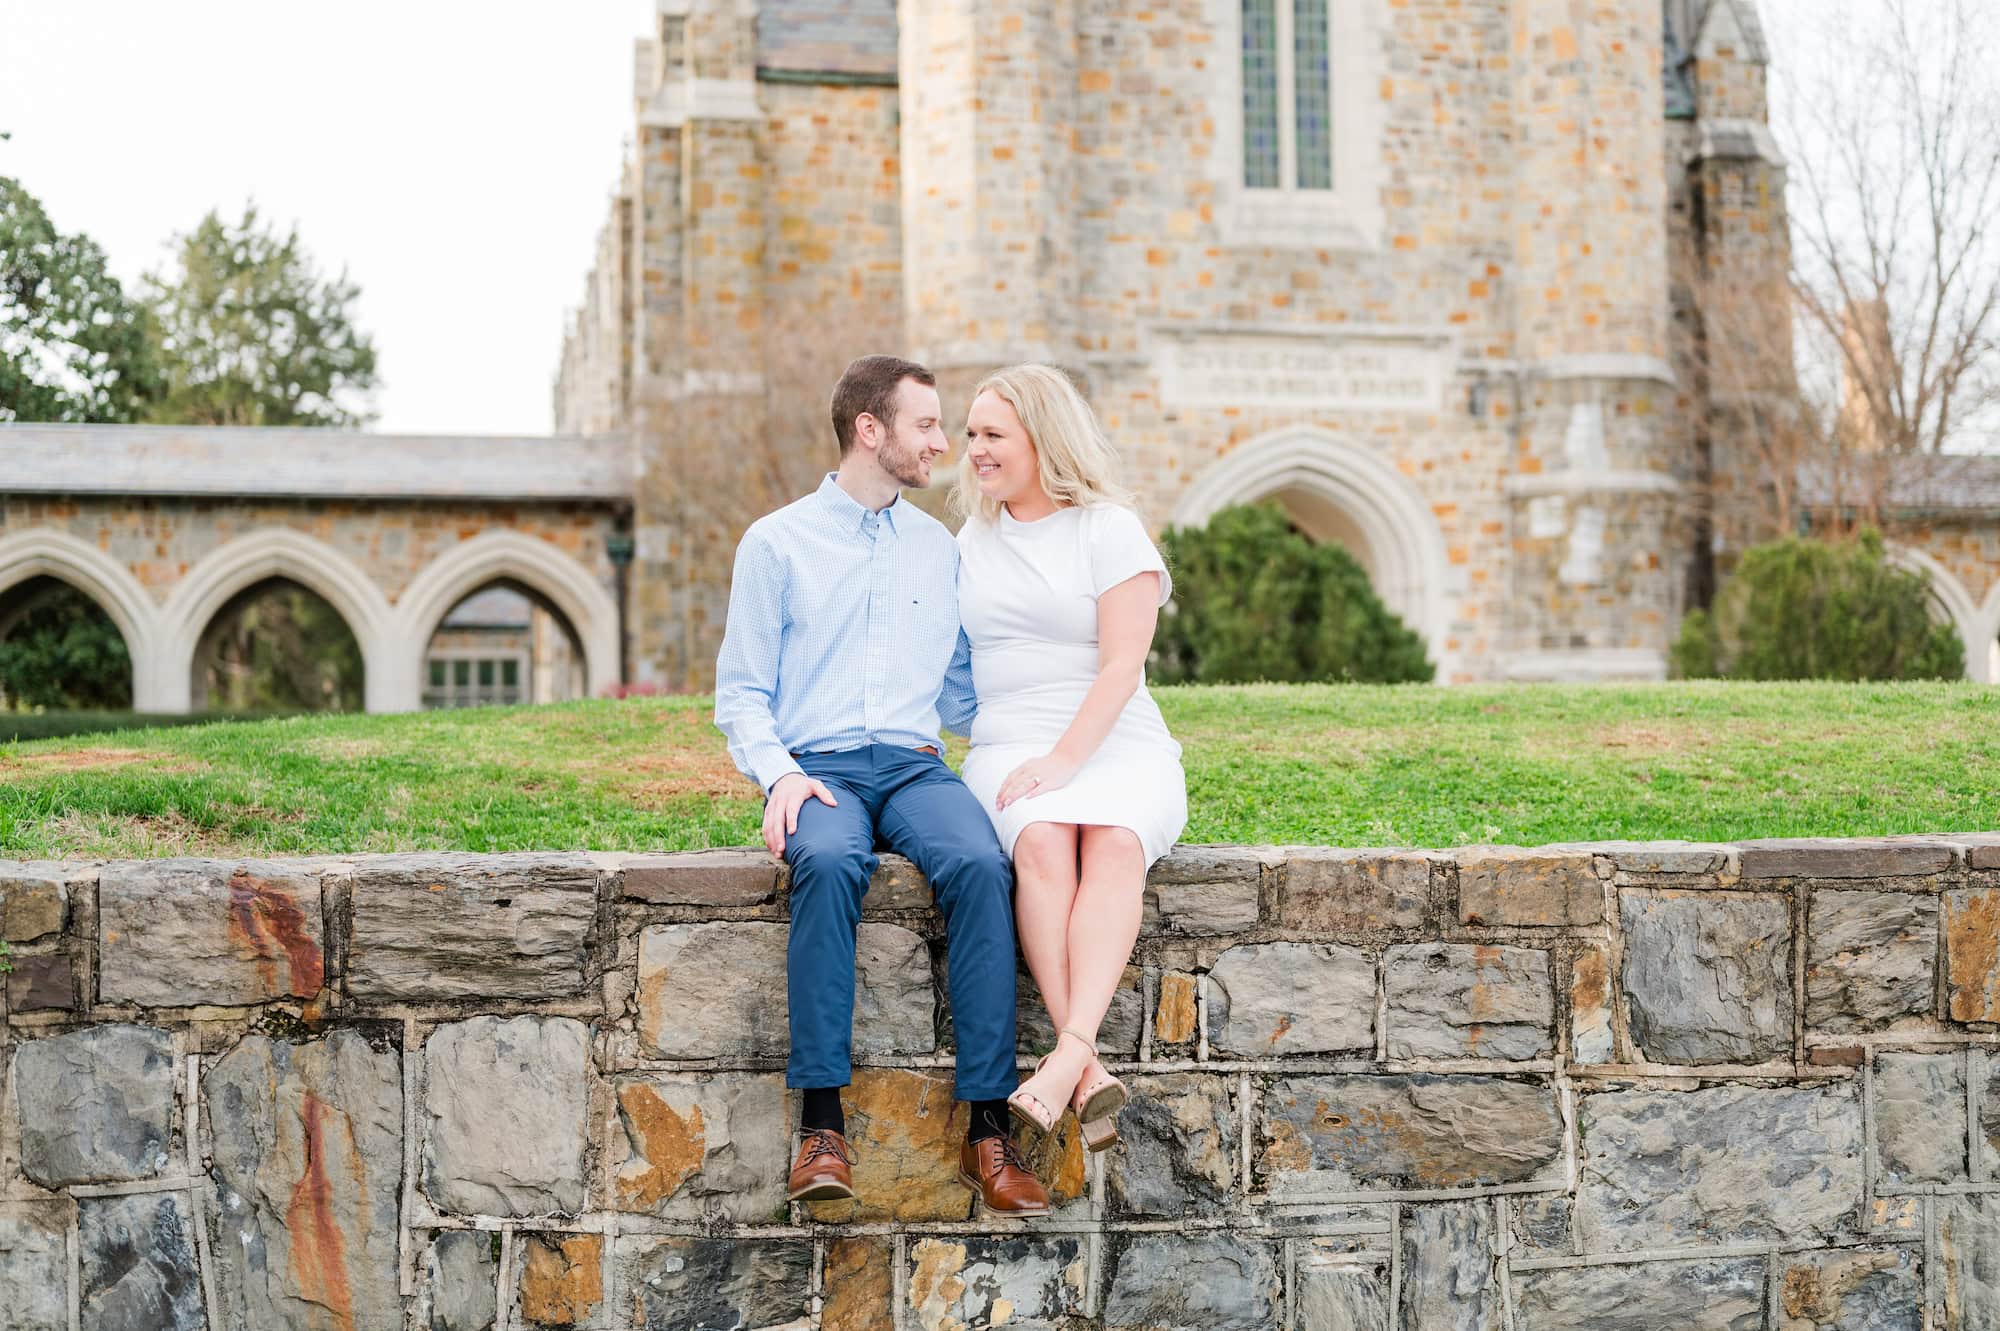 Berry college engagement photos, 